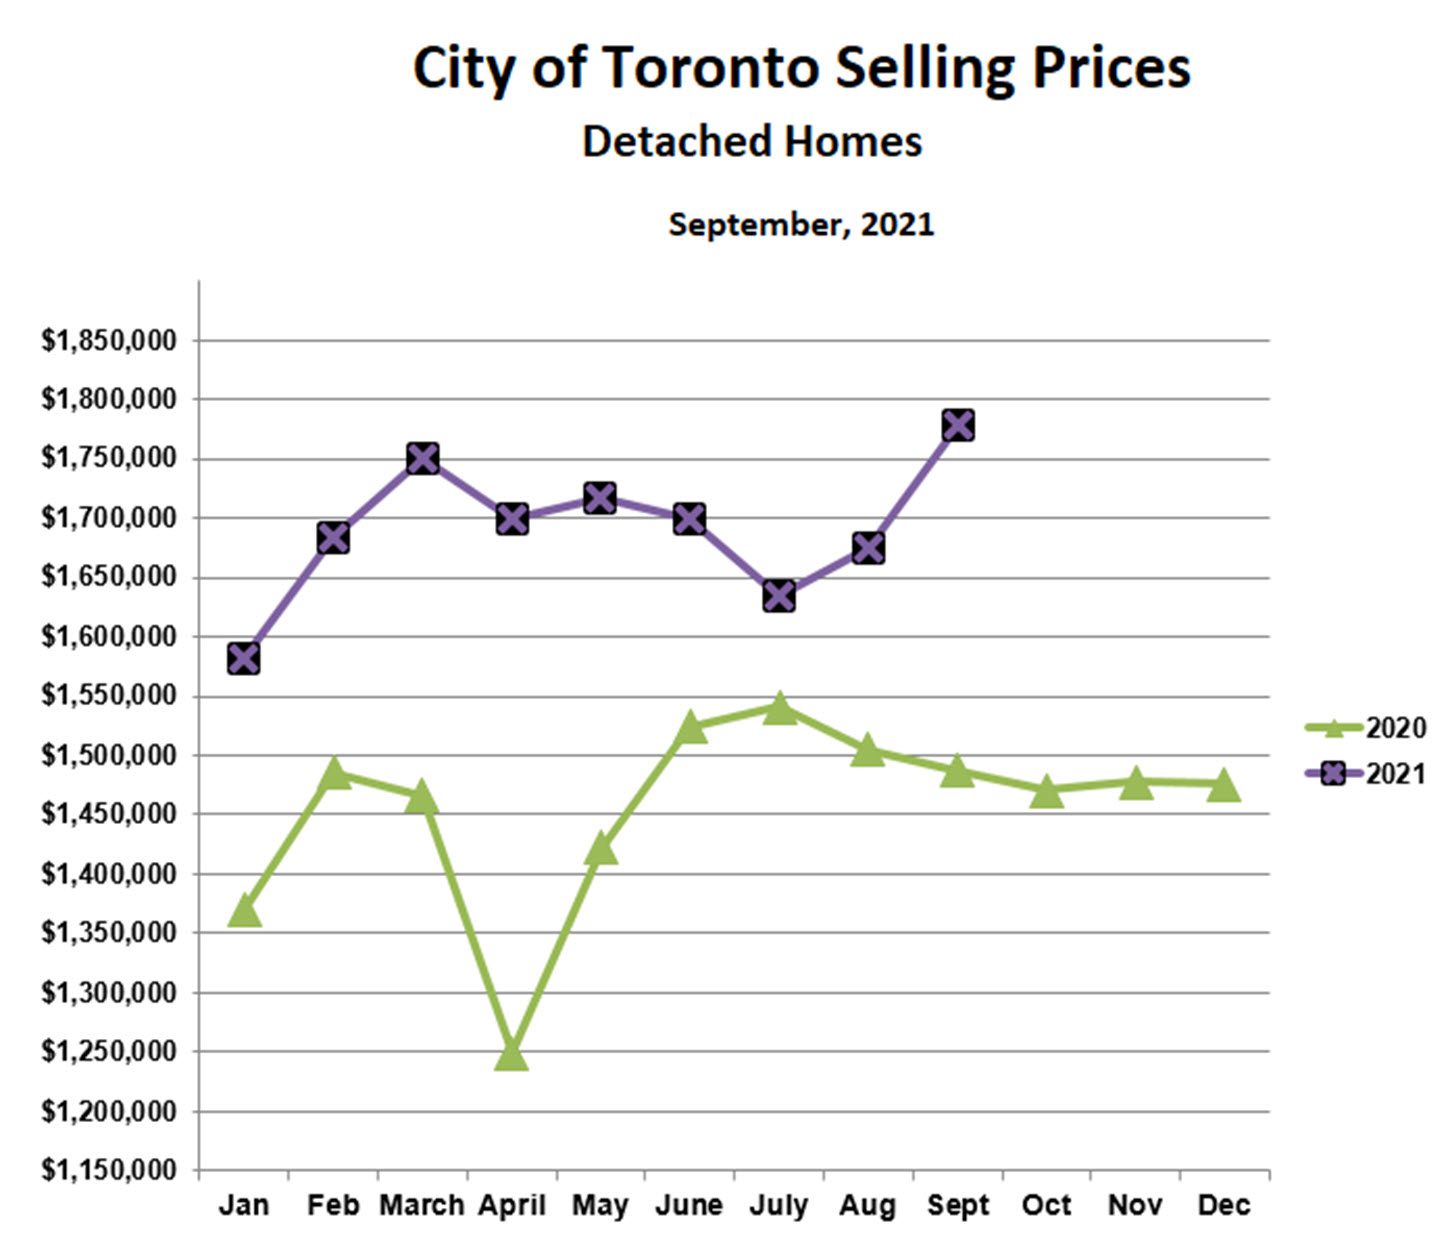 Prices for detached homes in Toronto